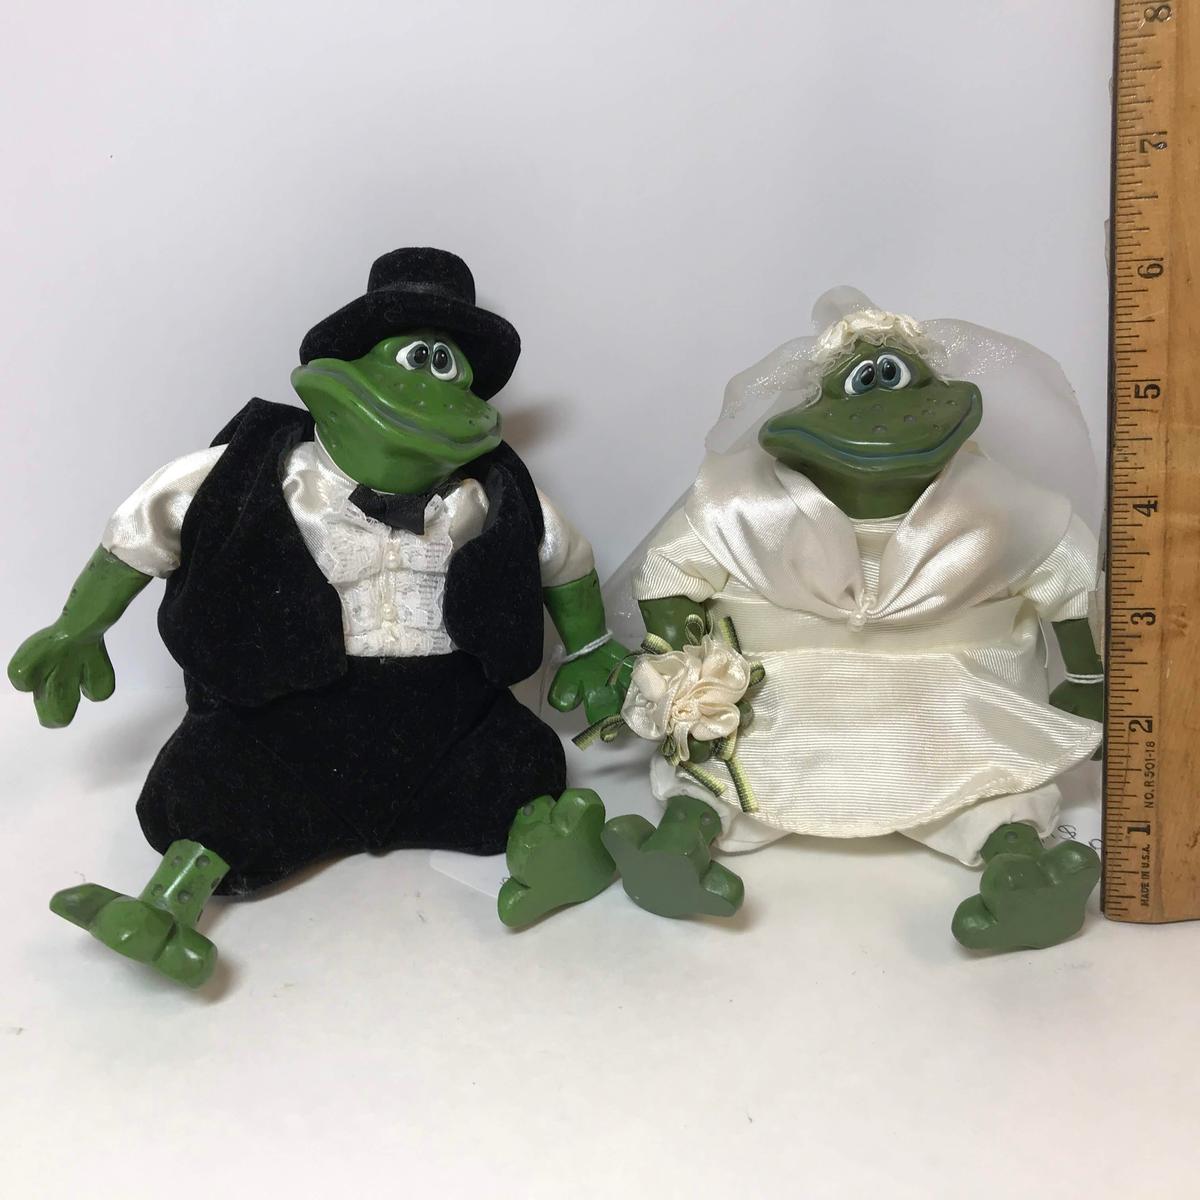 Mr. & Mrs. Pondhopper Bride & Groom Frogs with Plush Bodies